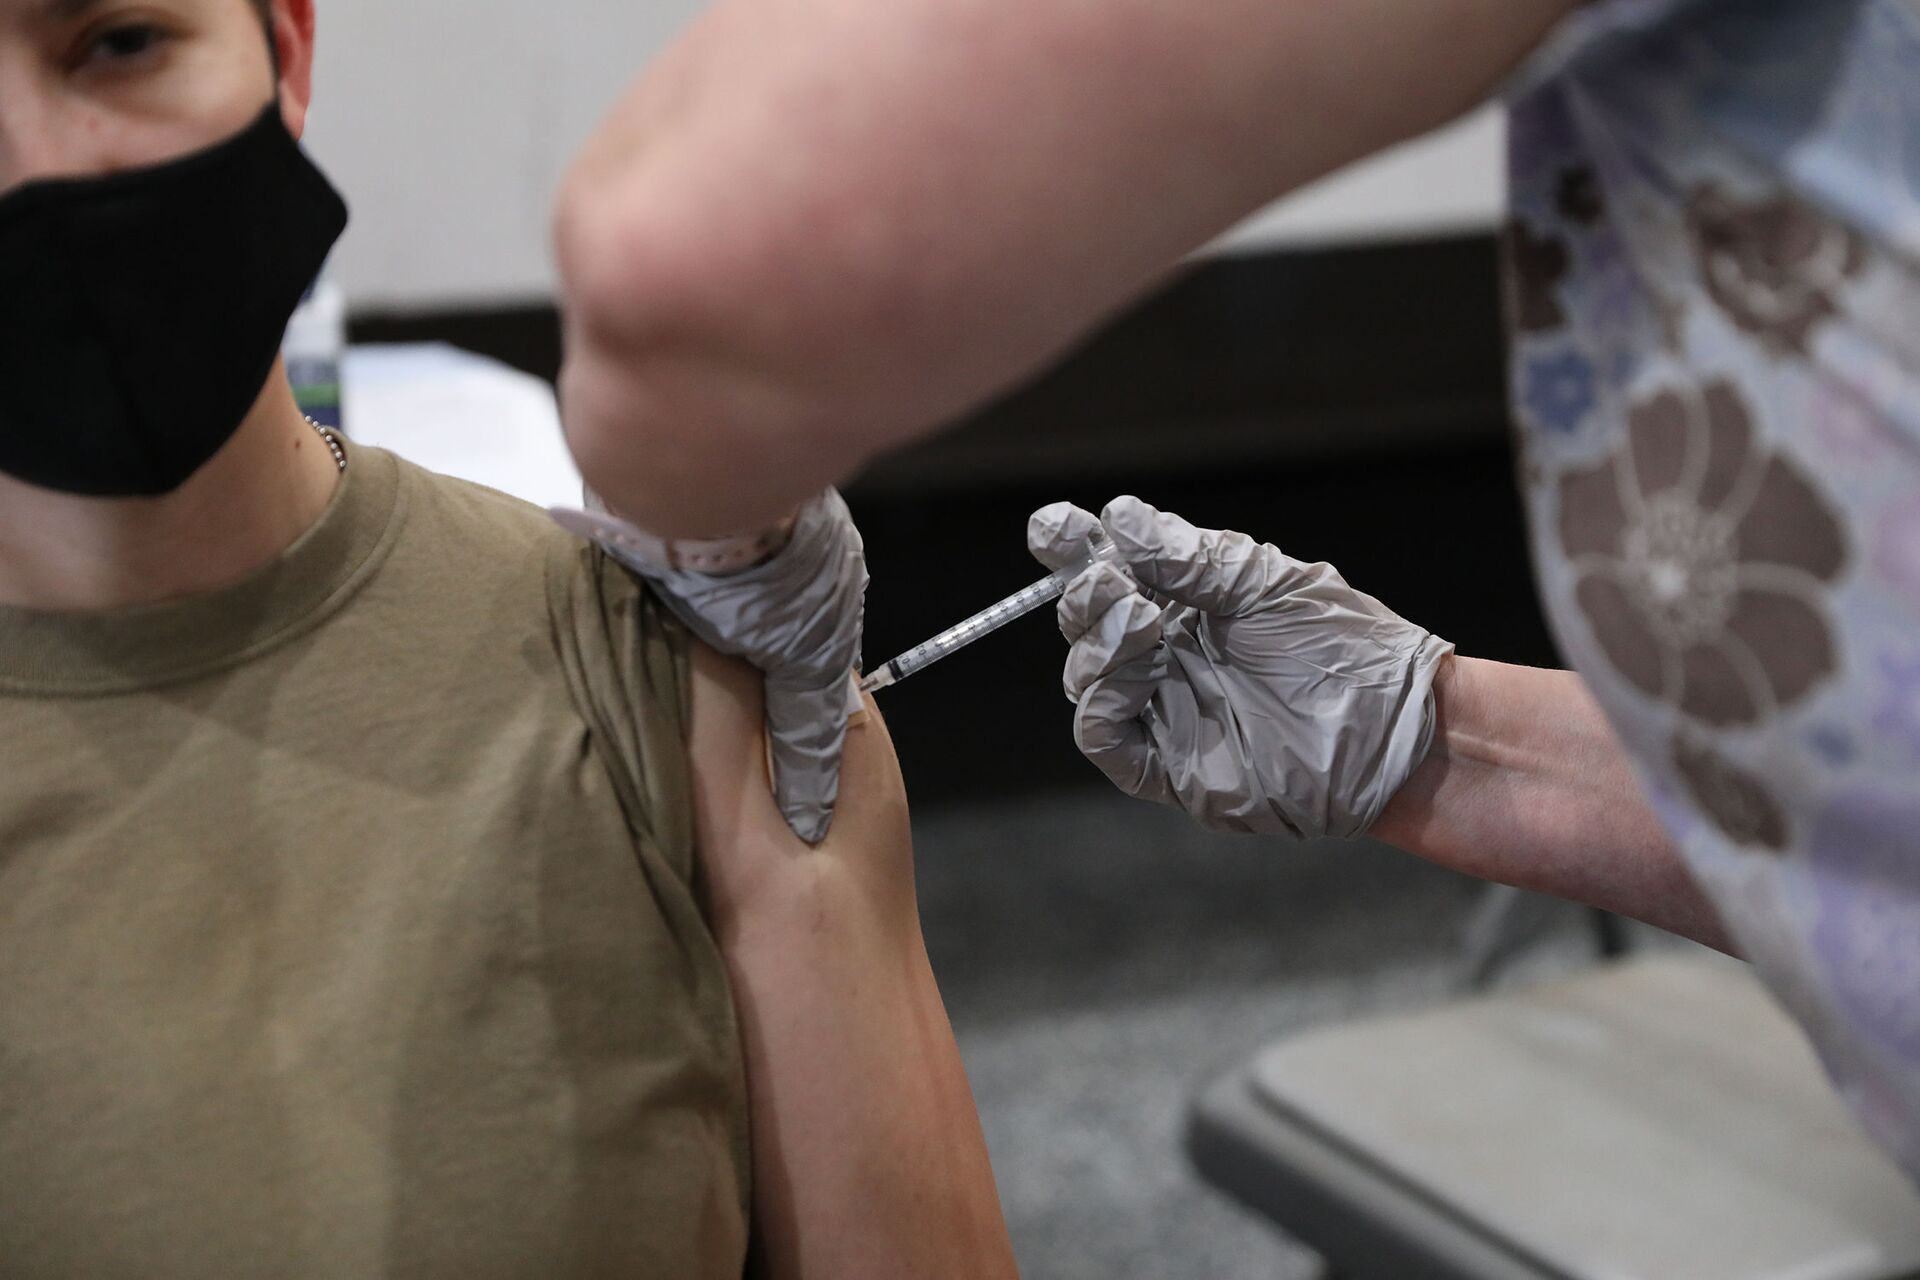 U.S. Army Sgt. Brandy Herrmann, assigned to the 24th Theater Public Affairs Support Element, receives the COVID-19 vaccination at Stayton Theater, at Fort Bliss, Texas, Feb. 5, 2021. Herrmann was instructed to wait 15 minutes before driving or participate in vigorous physical activity after receiving the shot. (U.S. Army photo by Pfc. Maxwell Bass, 24th Theater Public Affairs Support Element) - Sputnik International, 1920, 04.12.2021